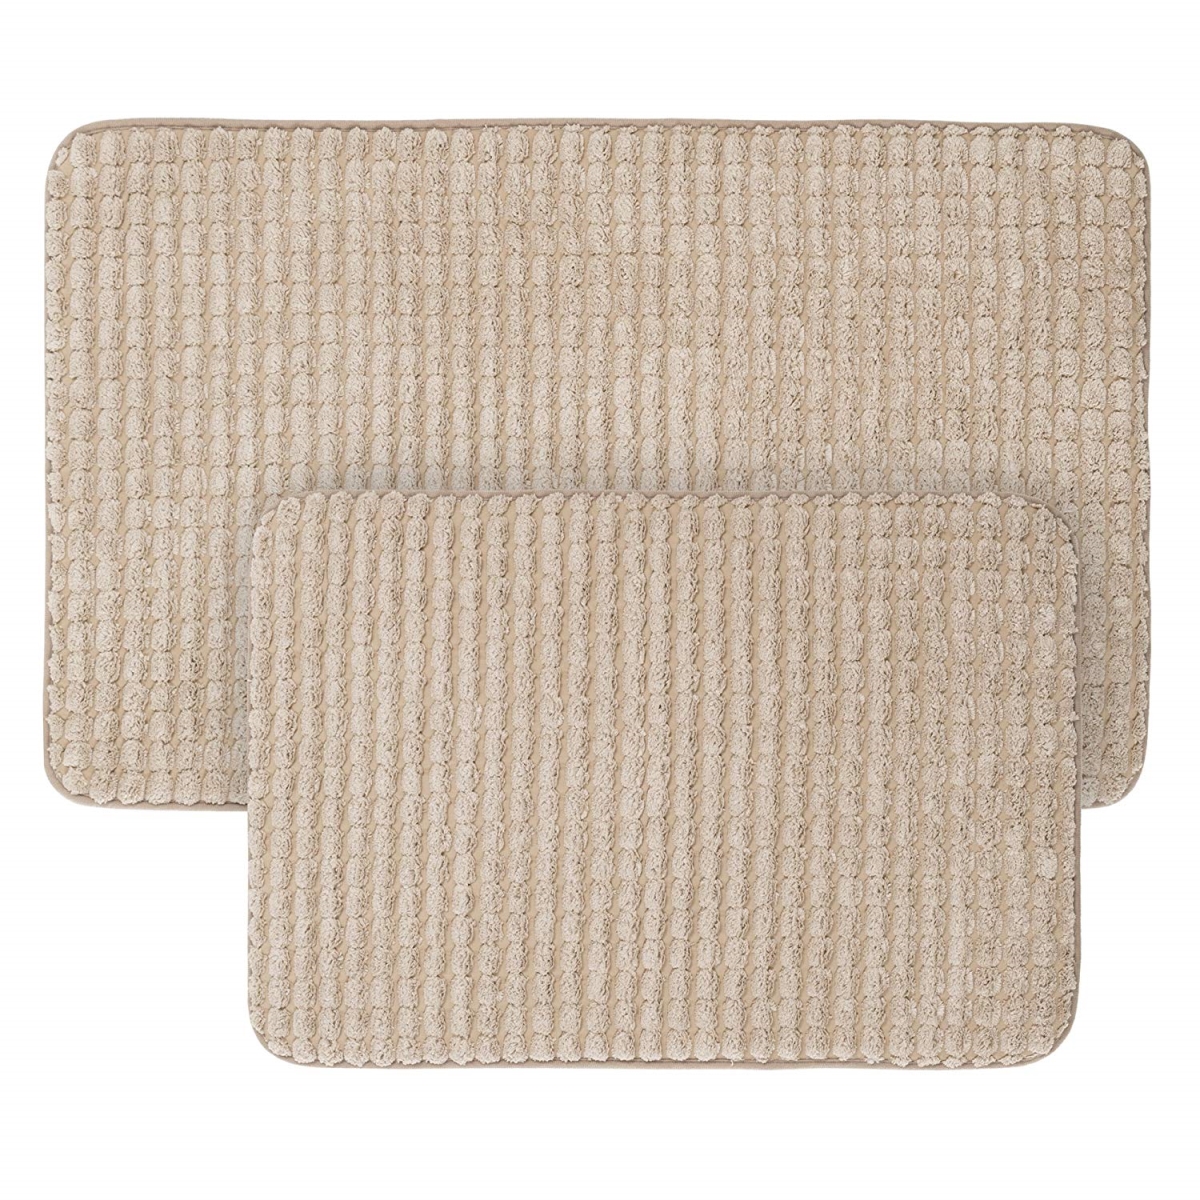 Picture of Bedford Home 67A-23369 2 Piece Memory Foam Bath Mat Set by Woven Jacquard Fleece - Taupe